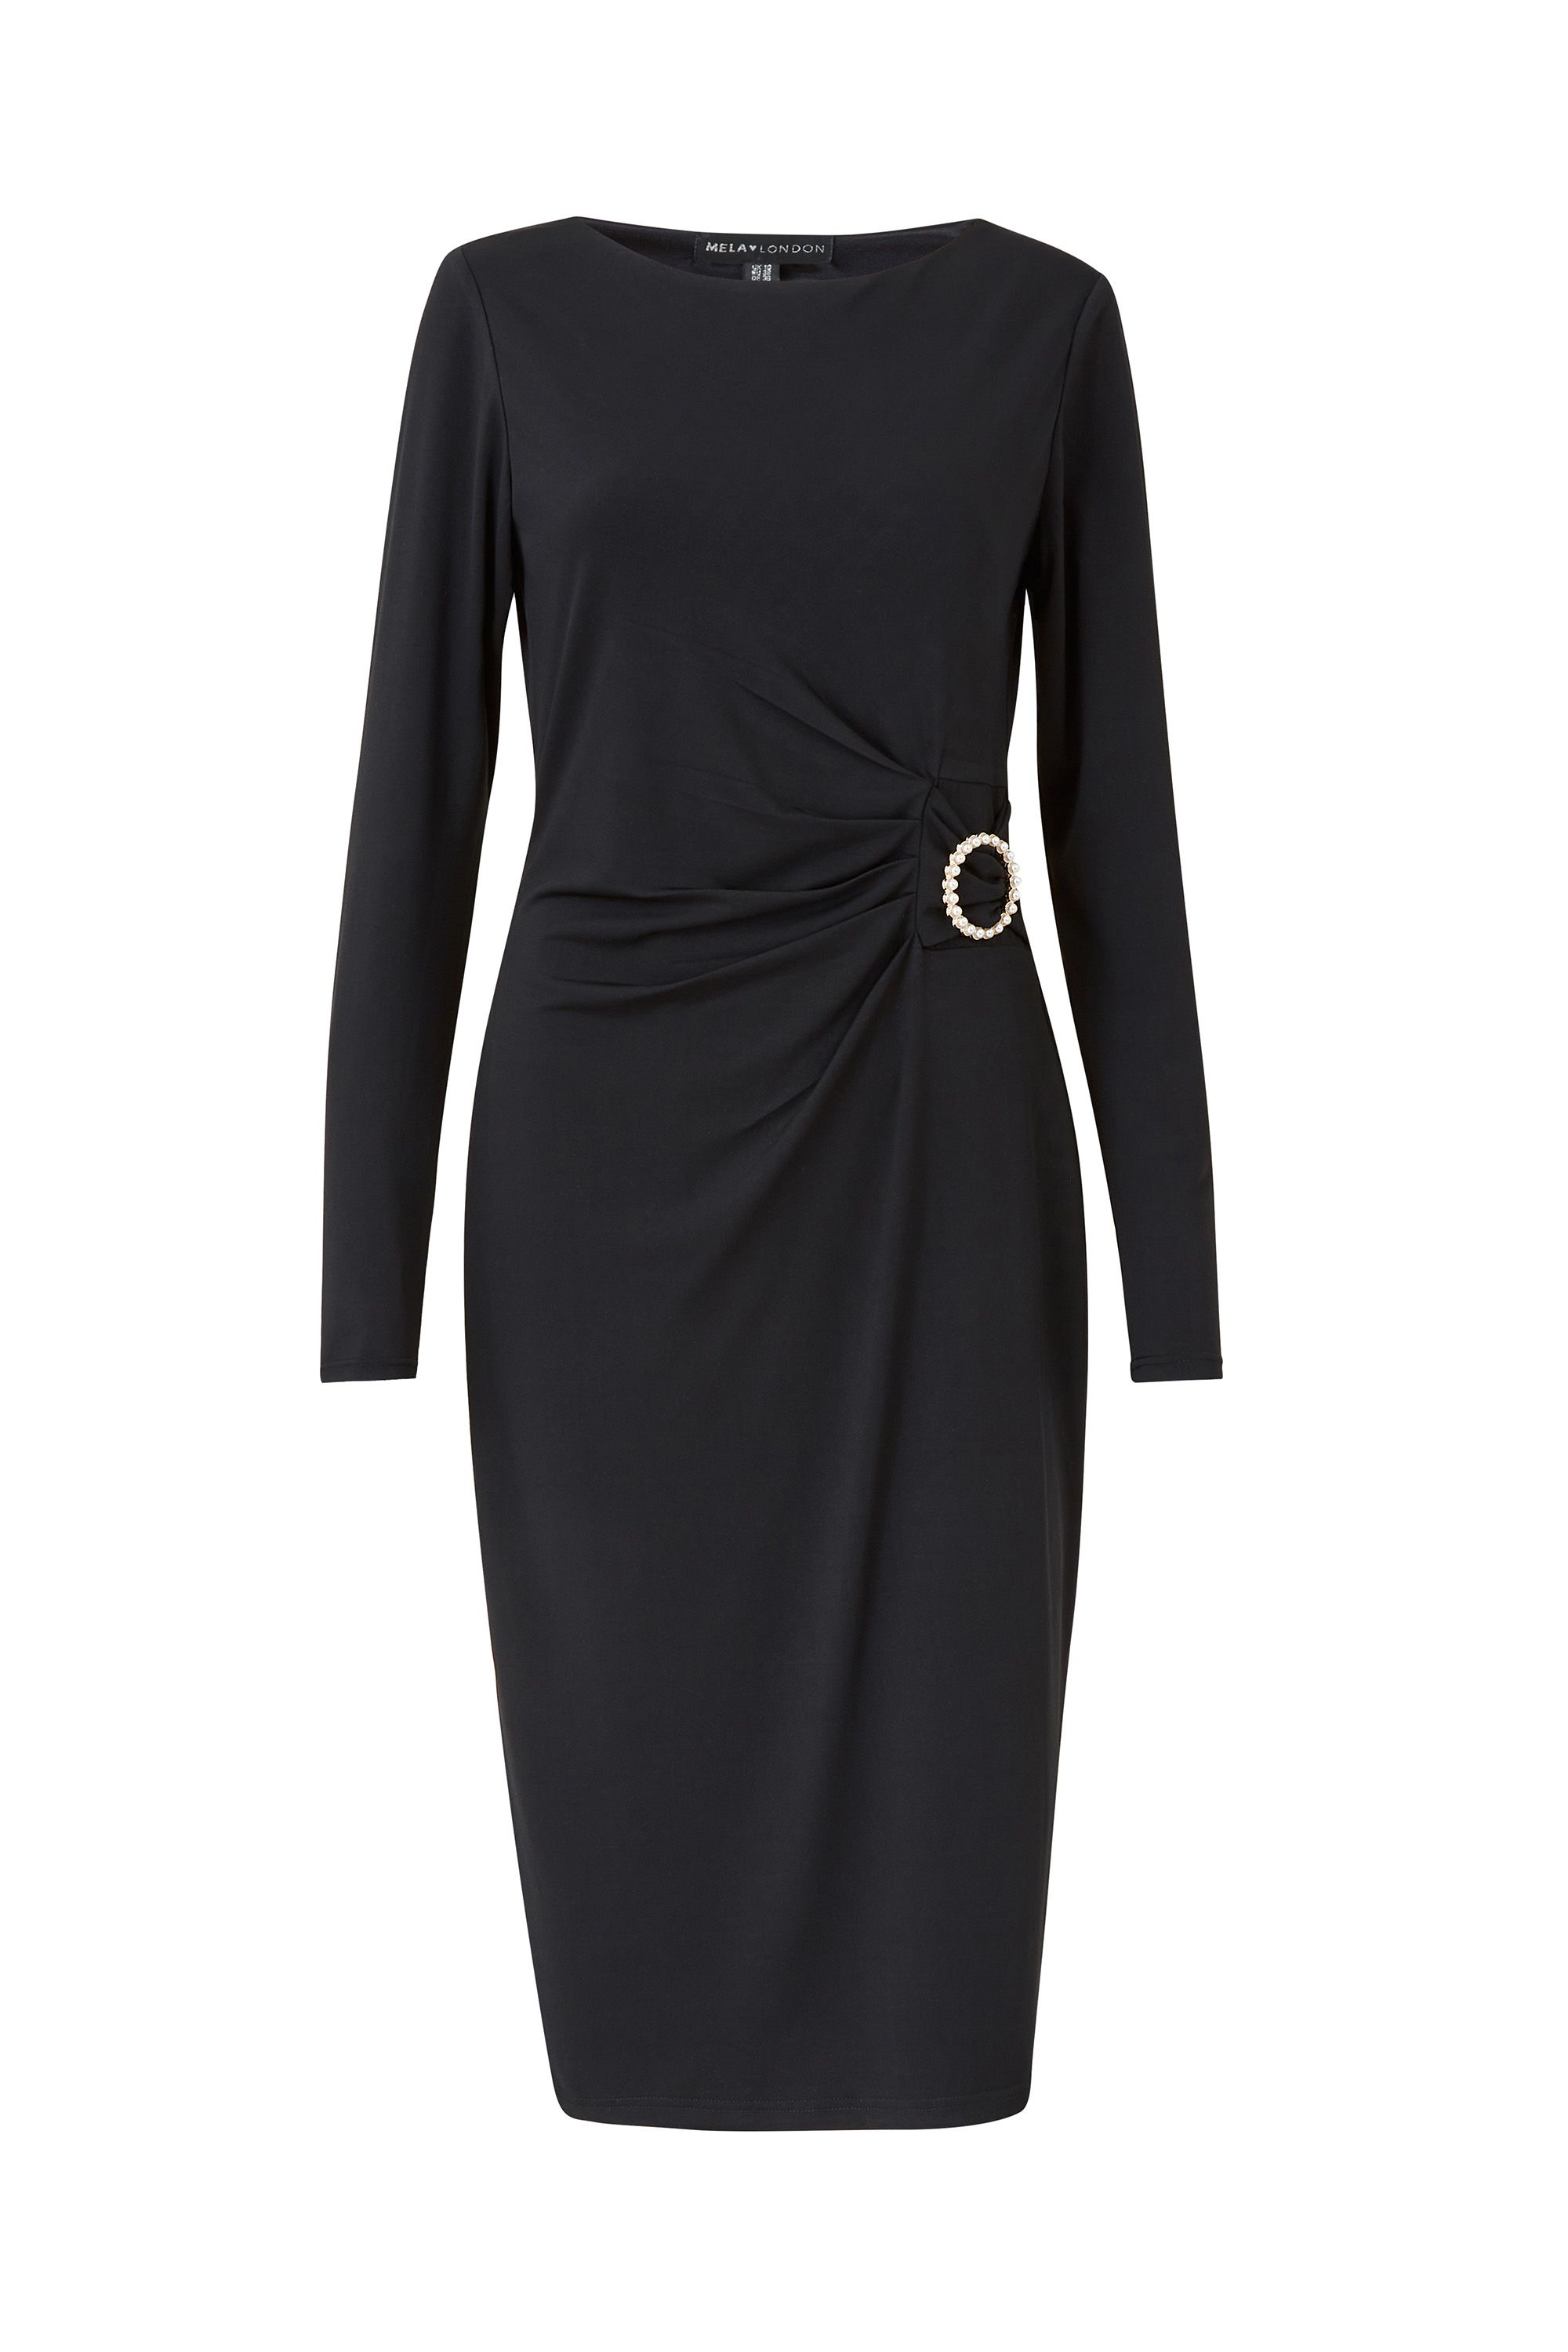 Achieve total elegance when you wear our Mela Buckle Bodycon Dress. In a form-fitting shape that sits below the knee, it's crafted from soft-touch fabric to keep you comfortable all night long. The ruched waistline is enhanced by a faux-pearl buckle, whilst the long sleeves and a high neckline balance your profile. When styling, consider heels and a clutch bag.